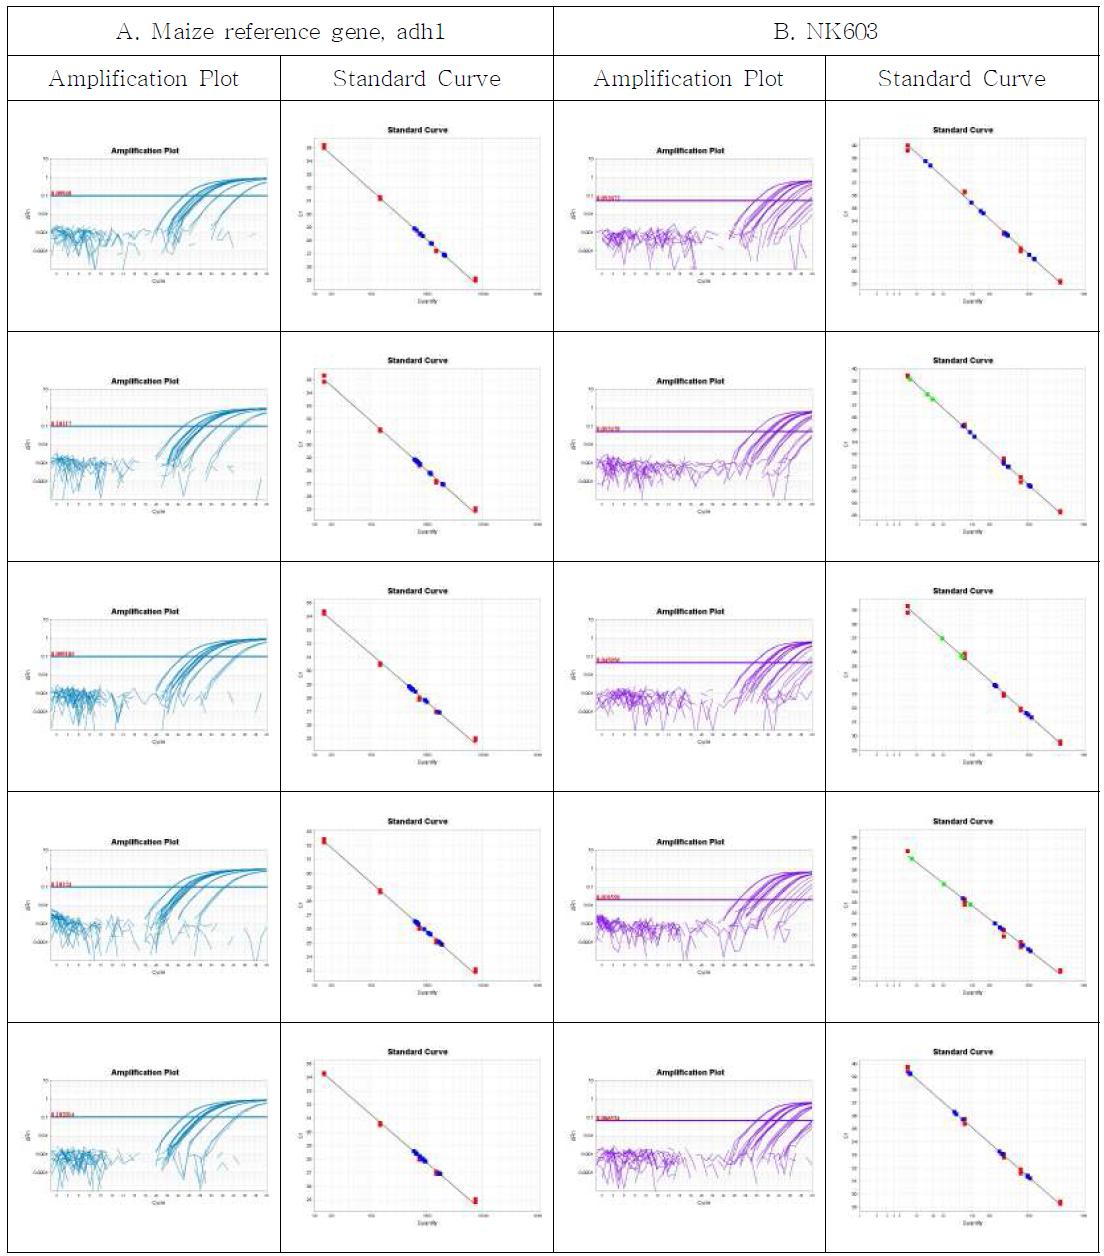 Amplification plots and standard curves for NK603 event-specific quantitative Real-time PCR method using gradient-diluted NK603 CRM genomic DNA as the template, performed by Lab. 2. A. Amplification graph and standard curves for the maize reference gene, Hmg assay. B. Amplification graph and standard curves for the NK603-event specific assay.